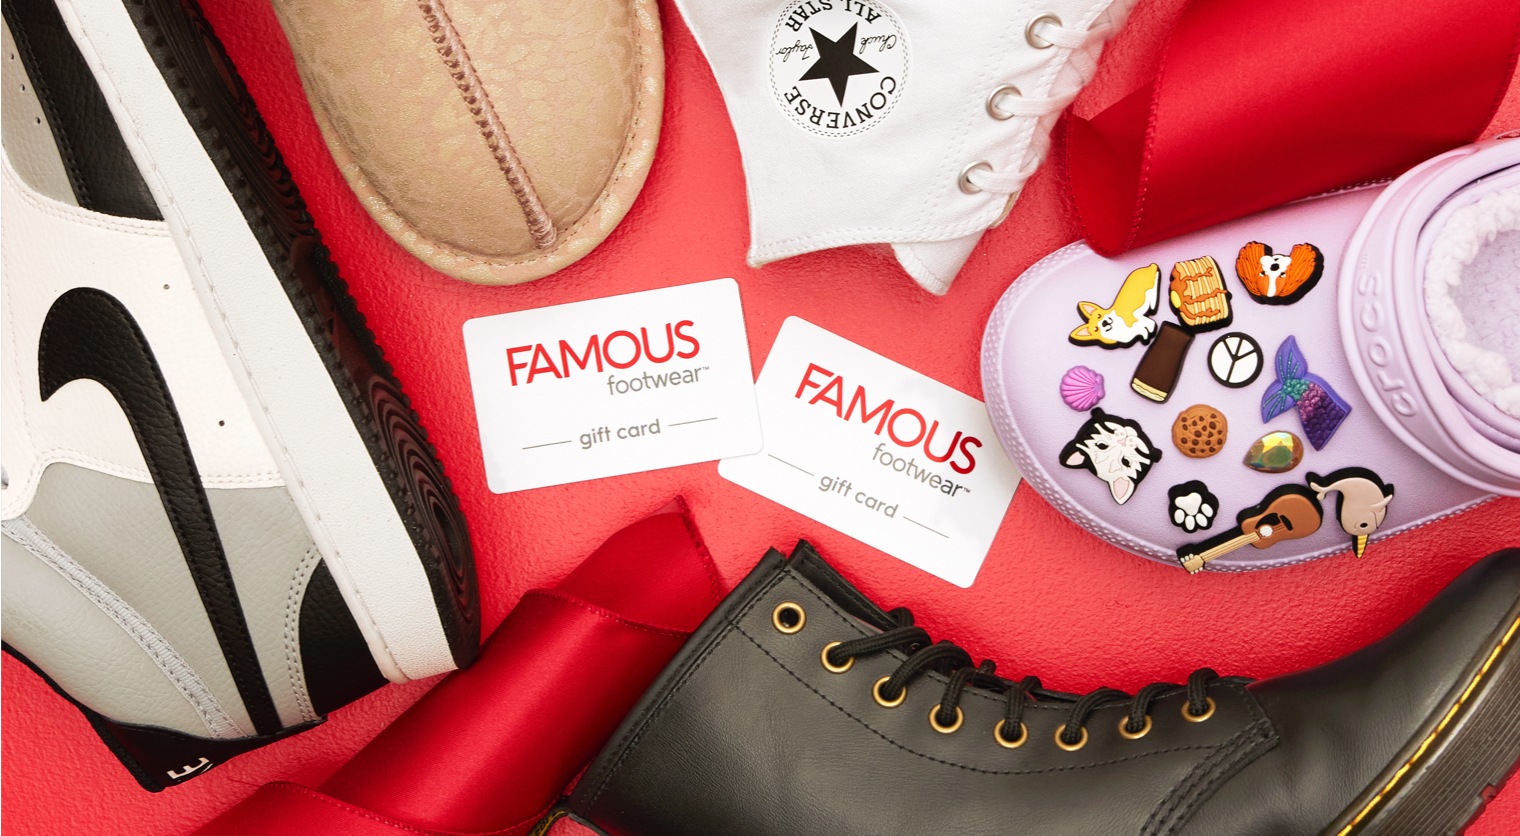 famous footwear gift cards among shoes from different brands